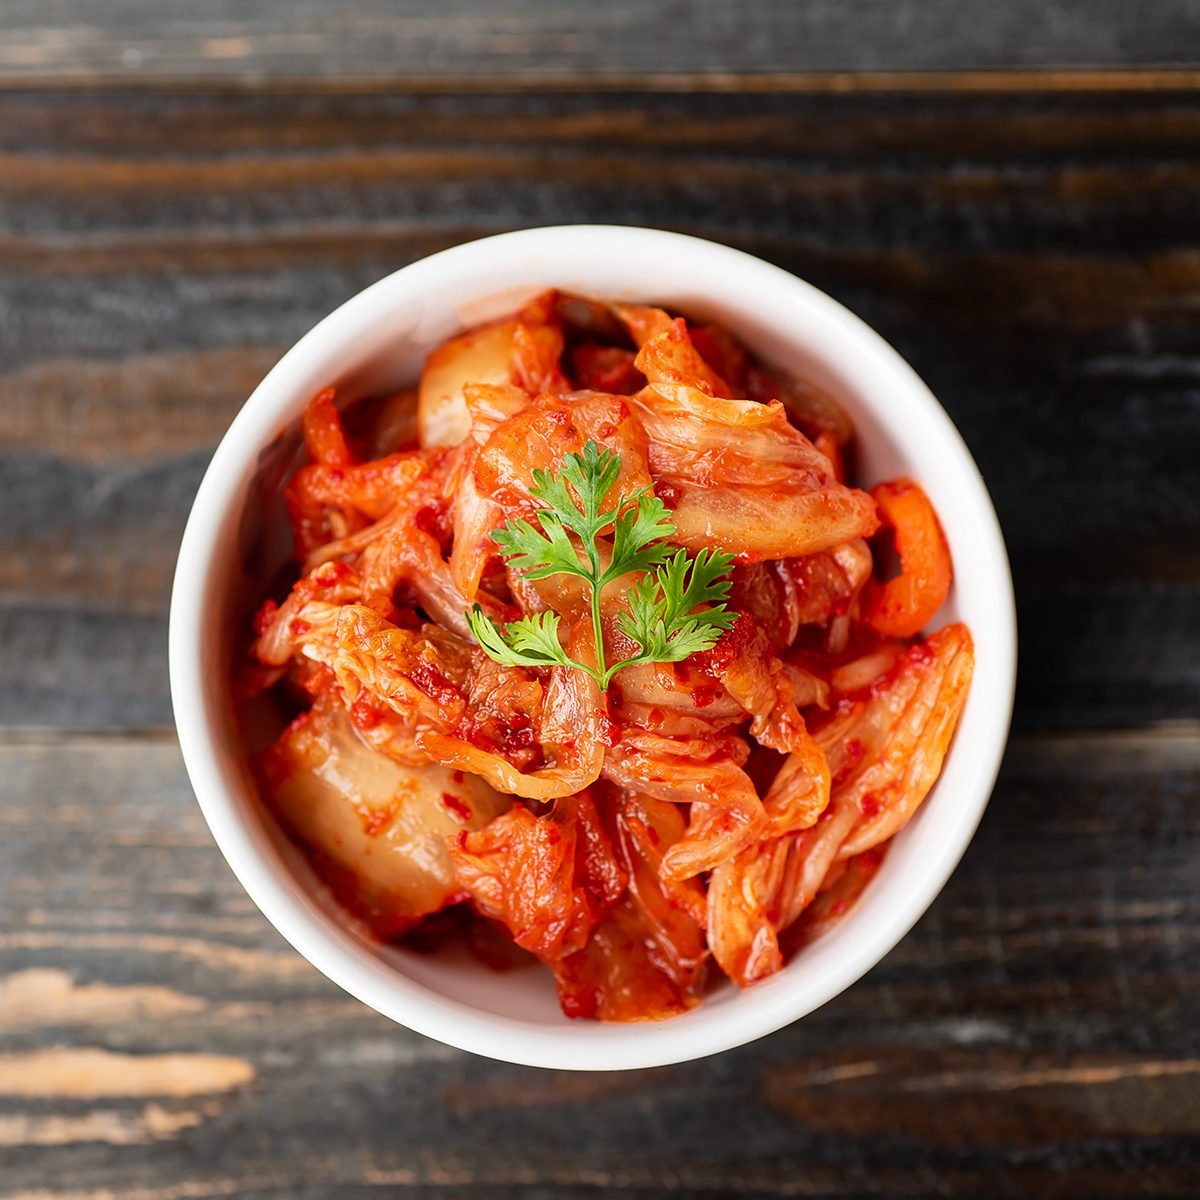 Kimchi cabbage in a bowl on wooden background